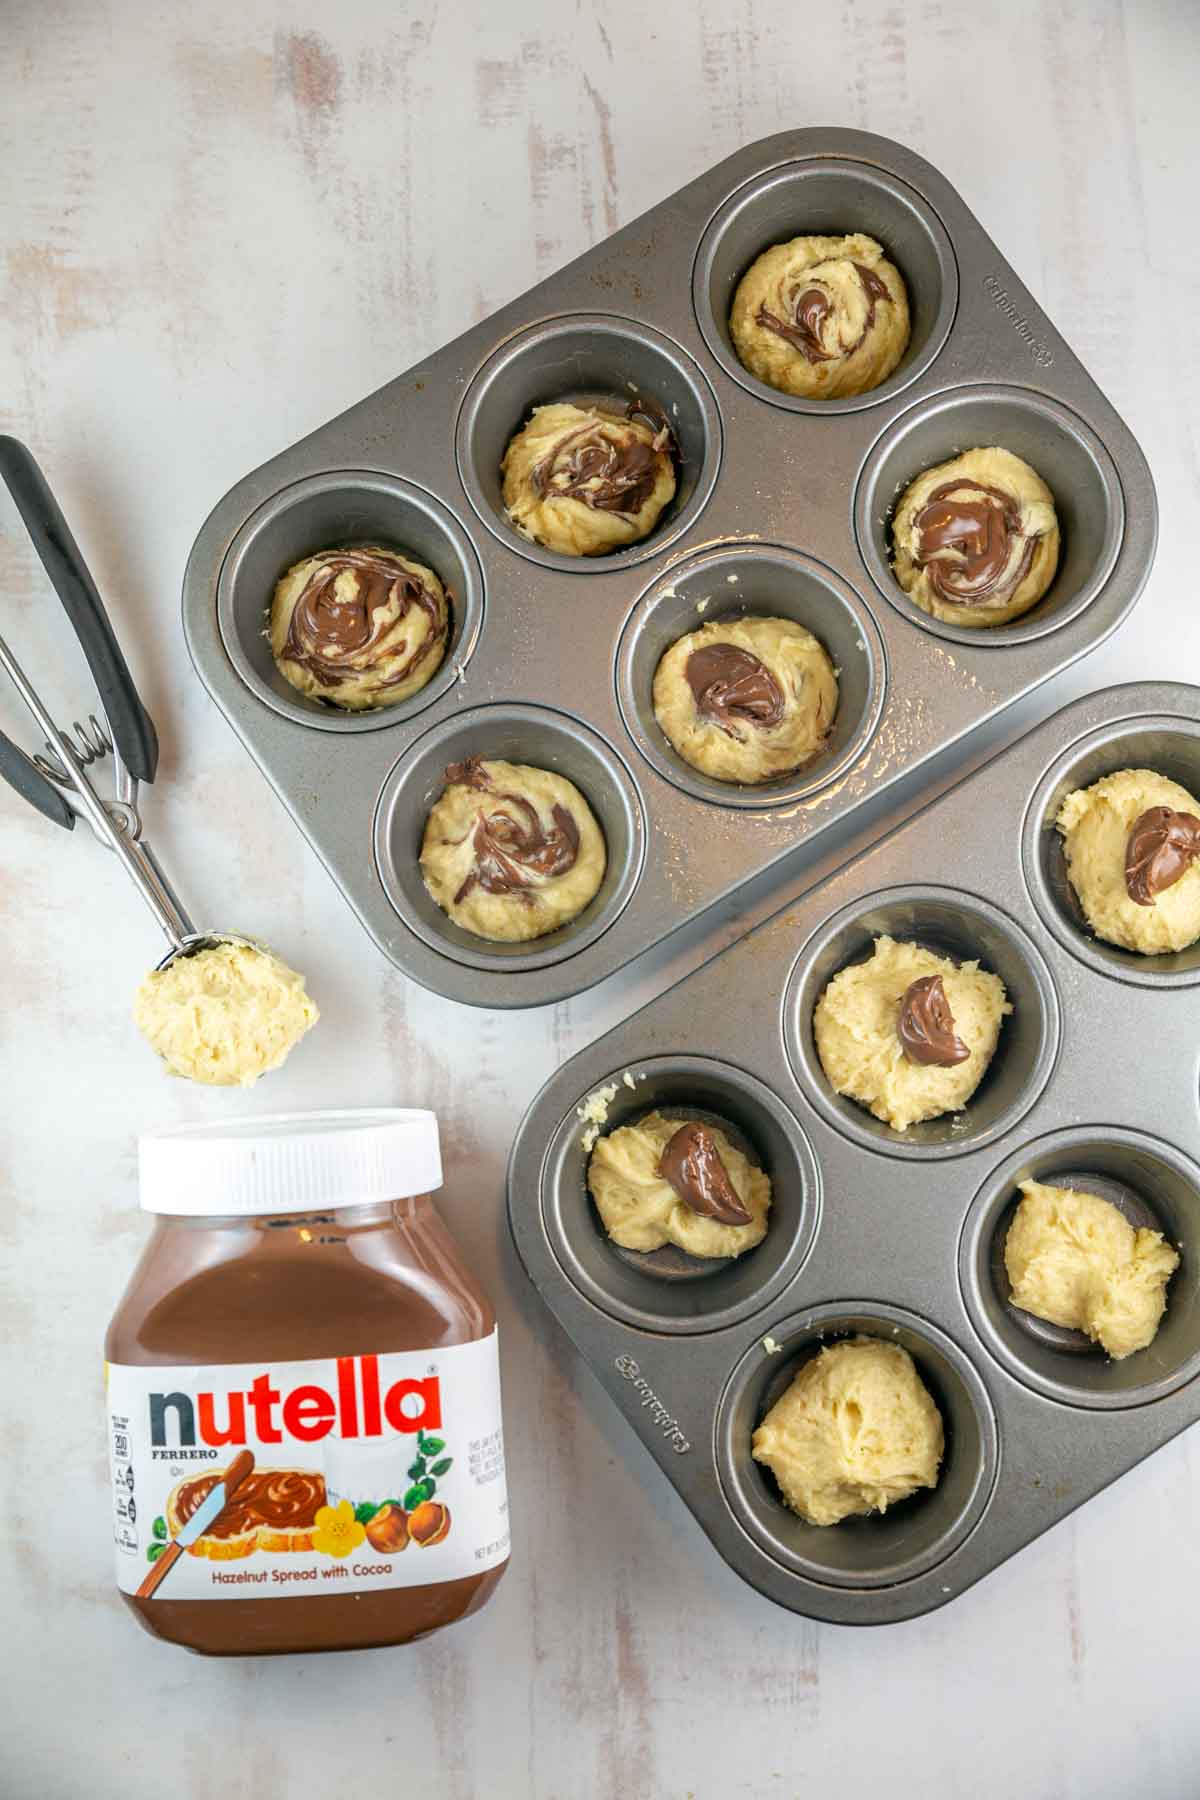 cupcake batter in a muffin tin next to a jar of nutella